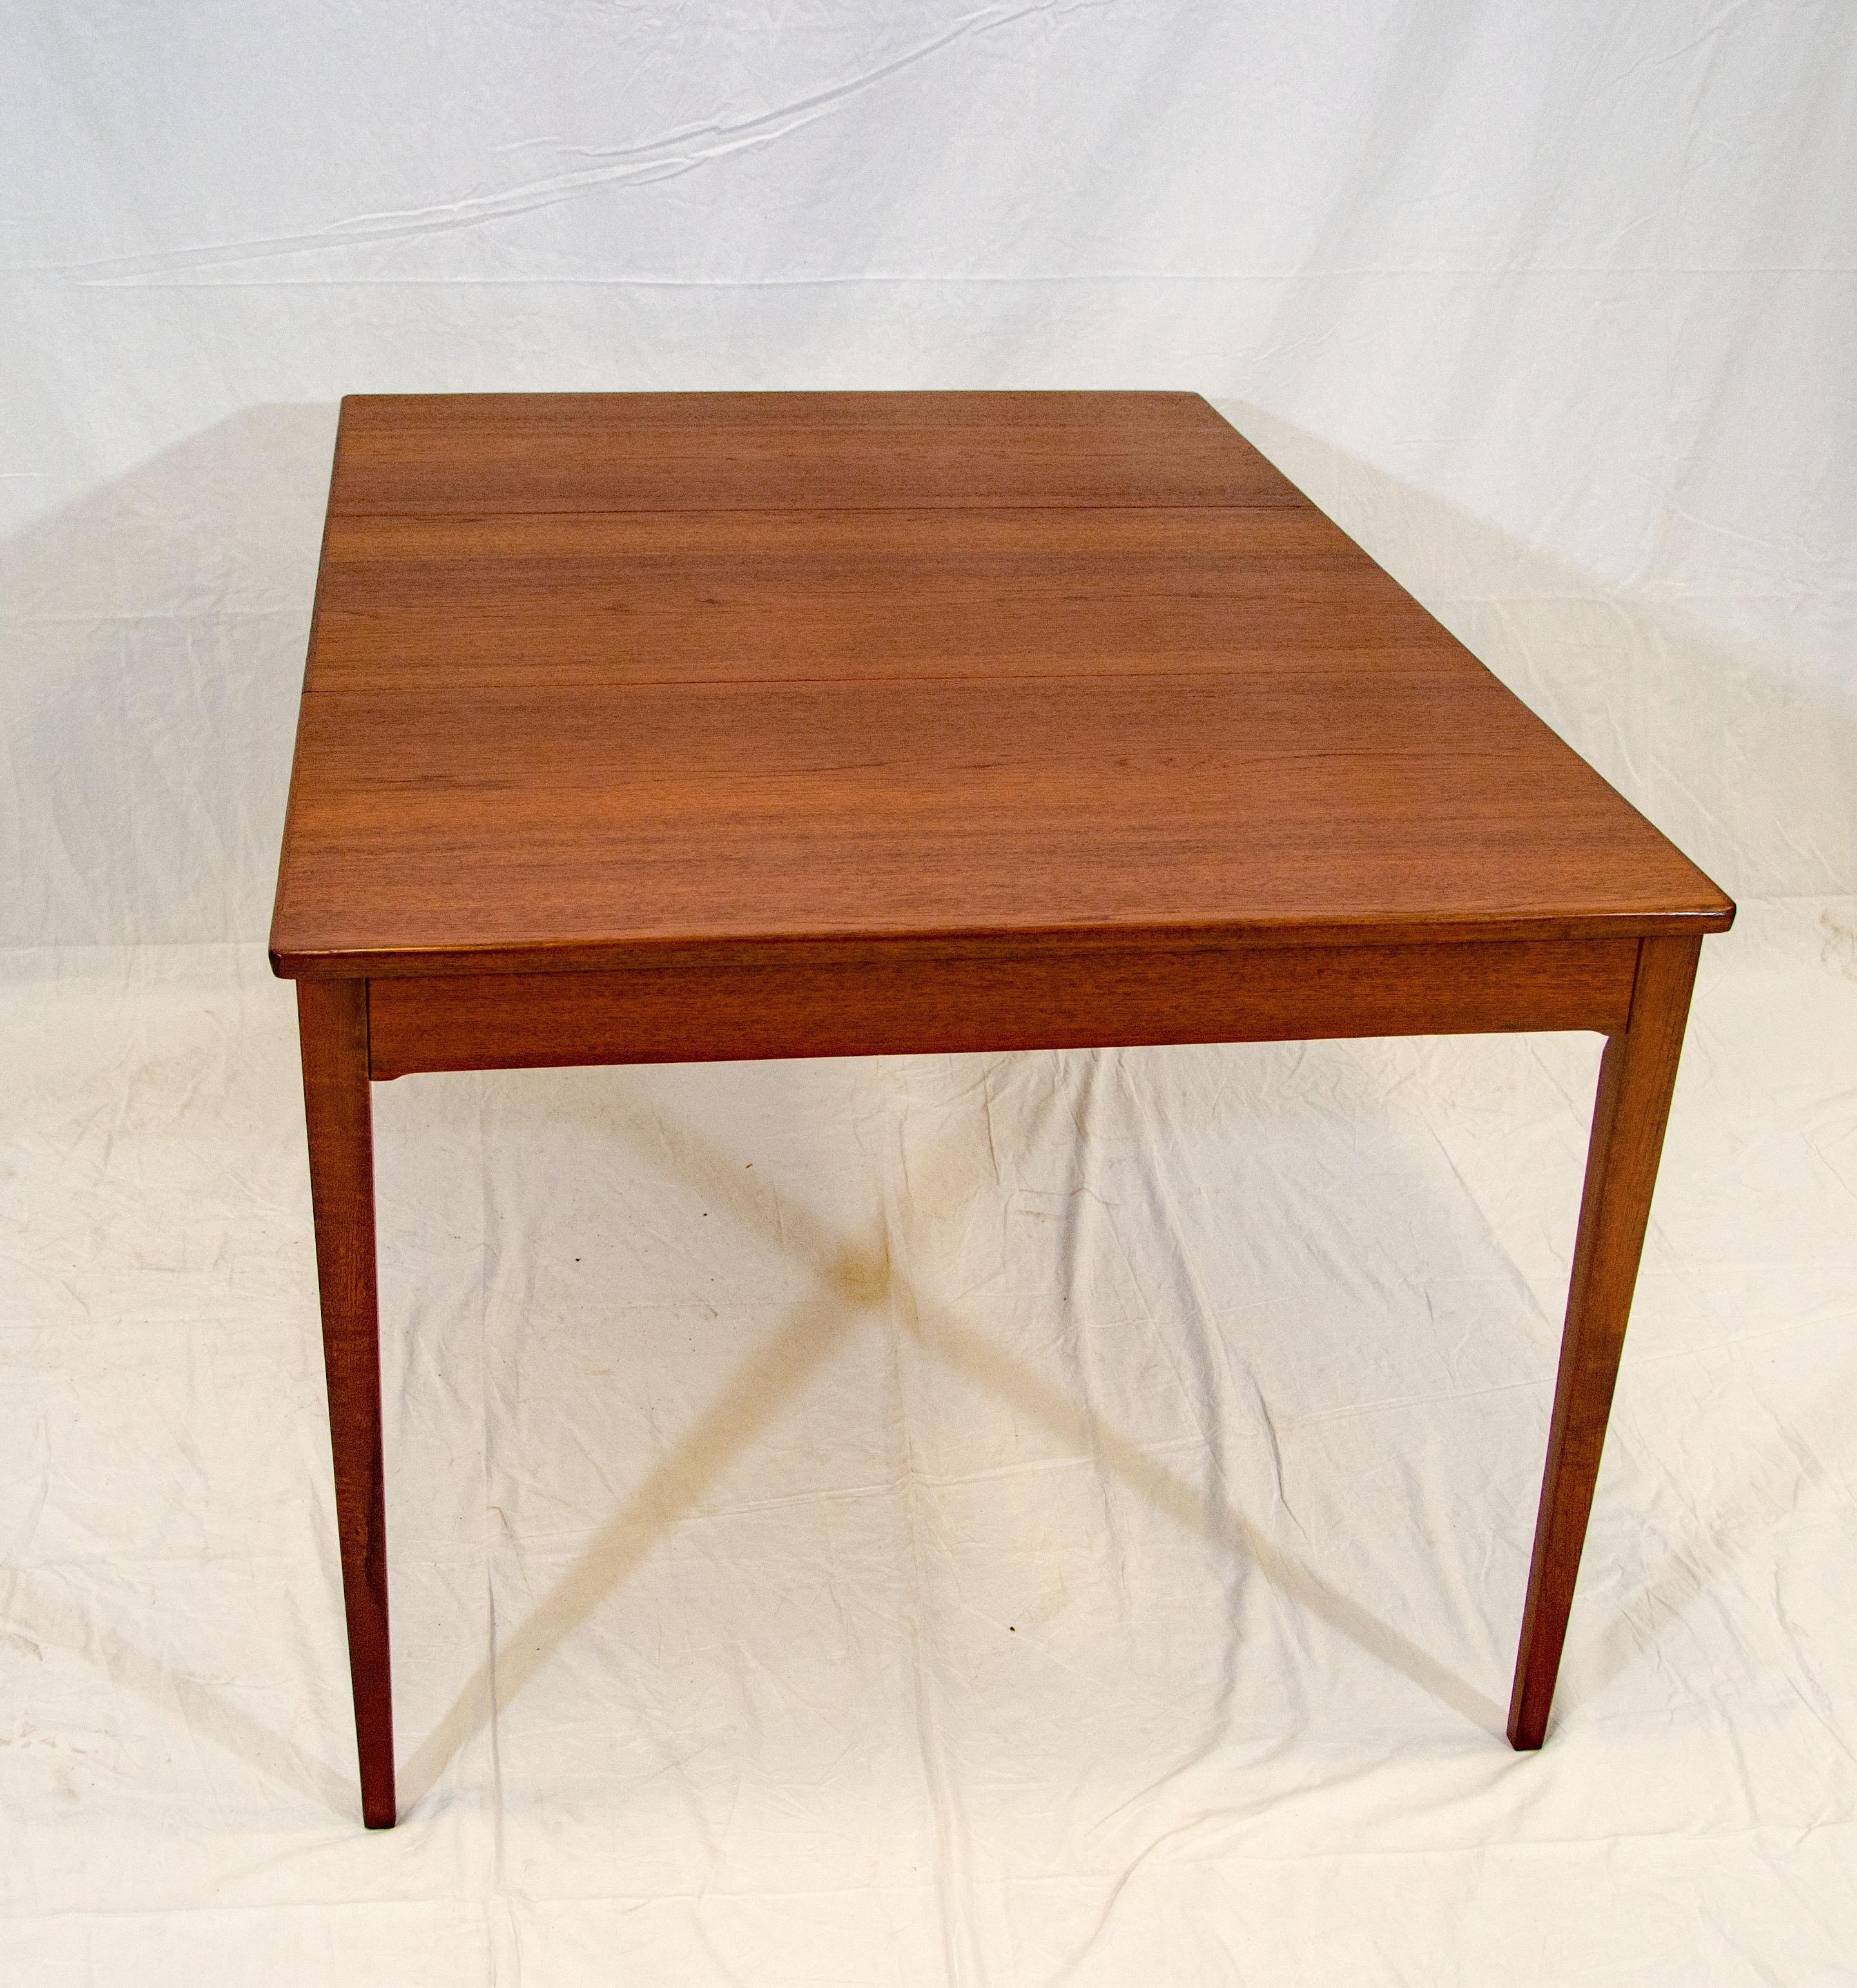 20th Century Danish Teak Square Dining Table with Two Leaves, Langkilde Møbler For Sale